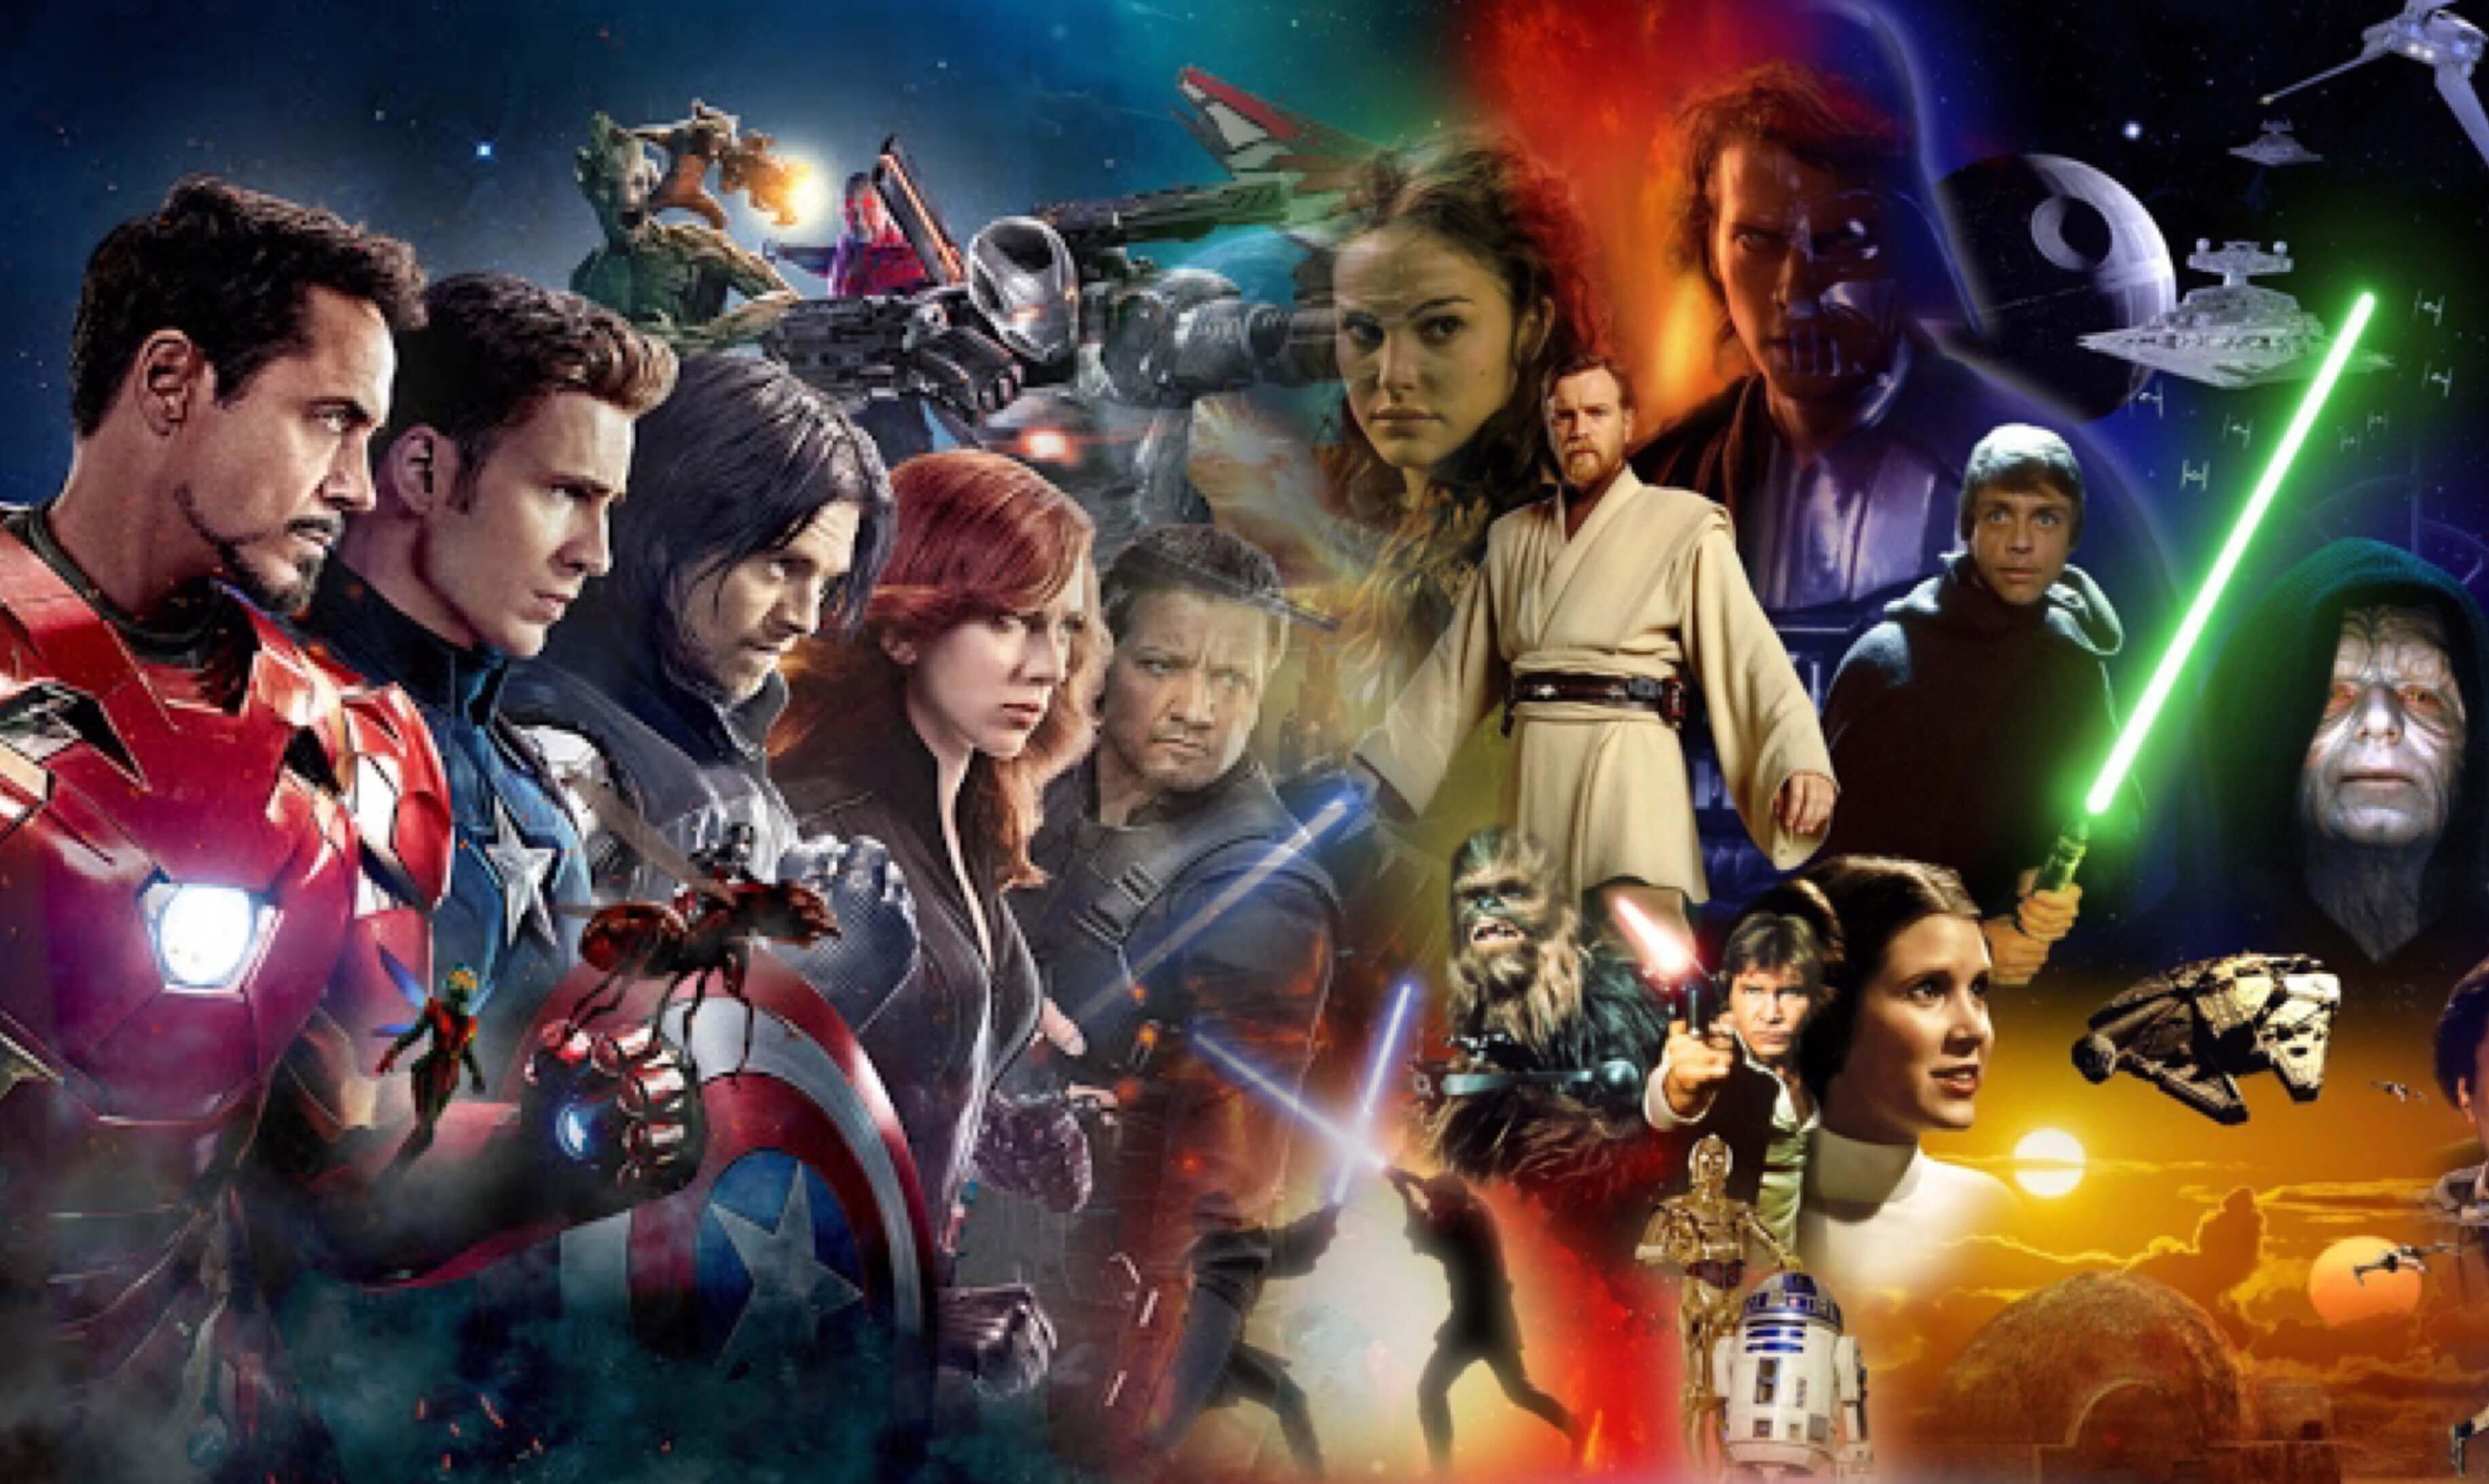 Netflix In Talks With Disney To Keep the Star Wars And Marvel Studios Films!